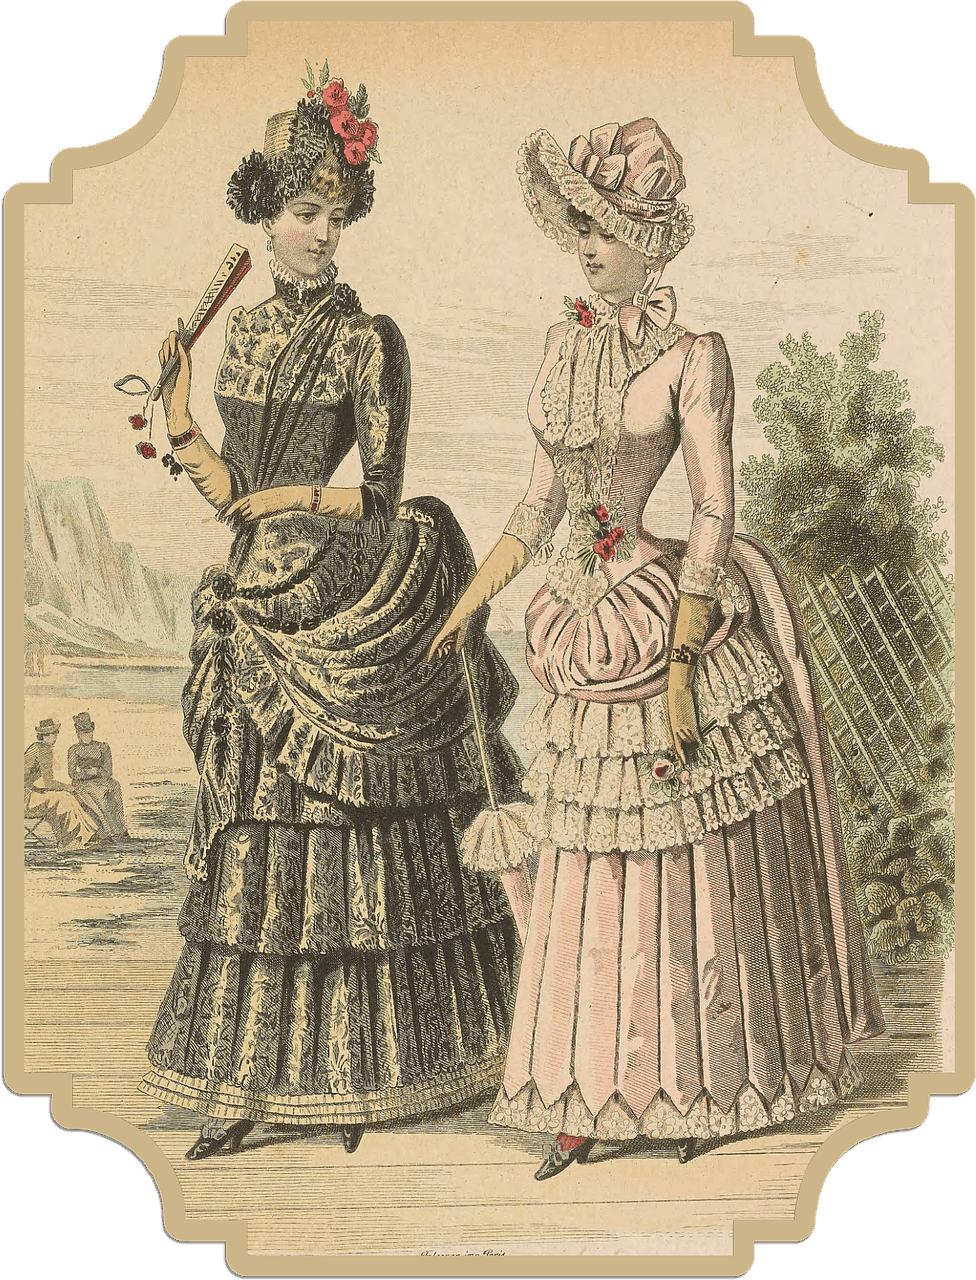 Discover the Alexandra Limp and other bizarre Victorian fashions